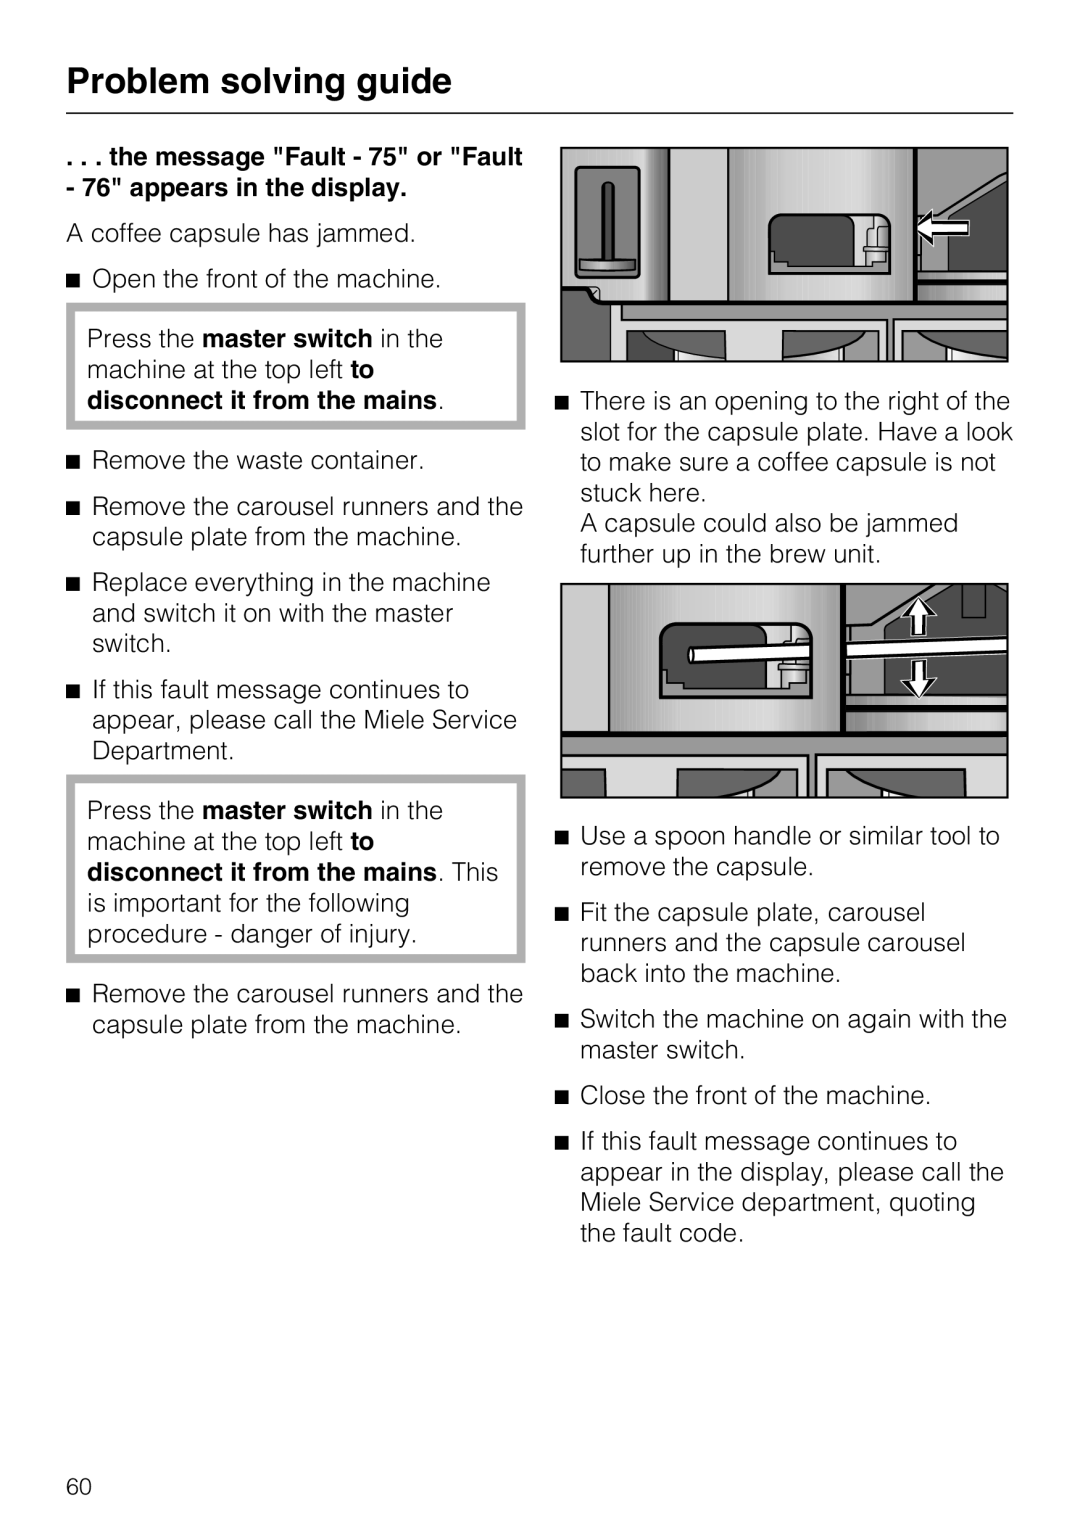 Miele CVA 3650 installation instructions Problem solving guide, A coffee capsule has jammed 